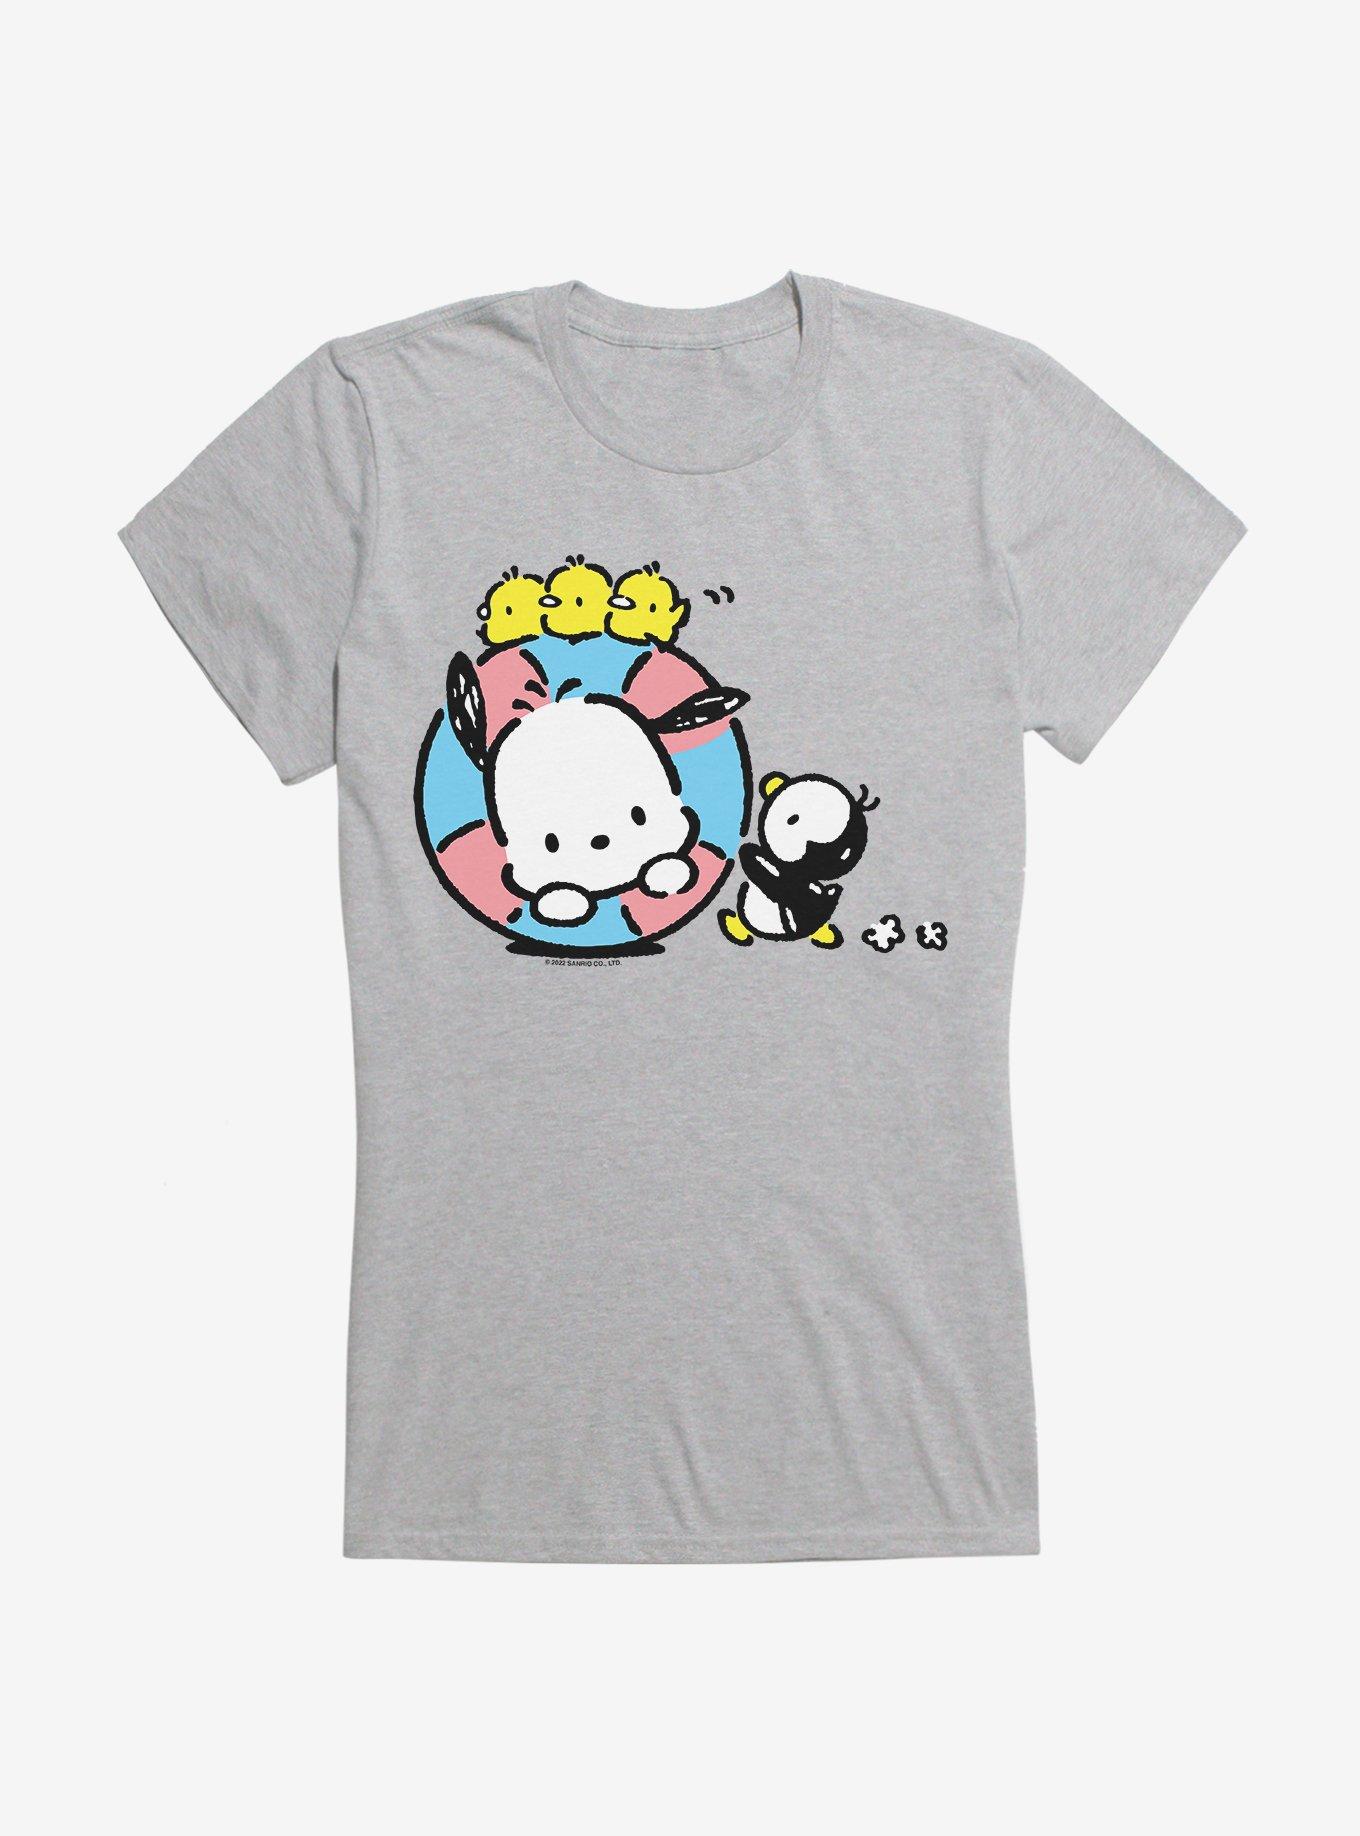 Pochacco Swimming With Friends Girls T-Shirt, , hi-res